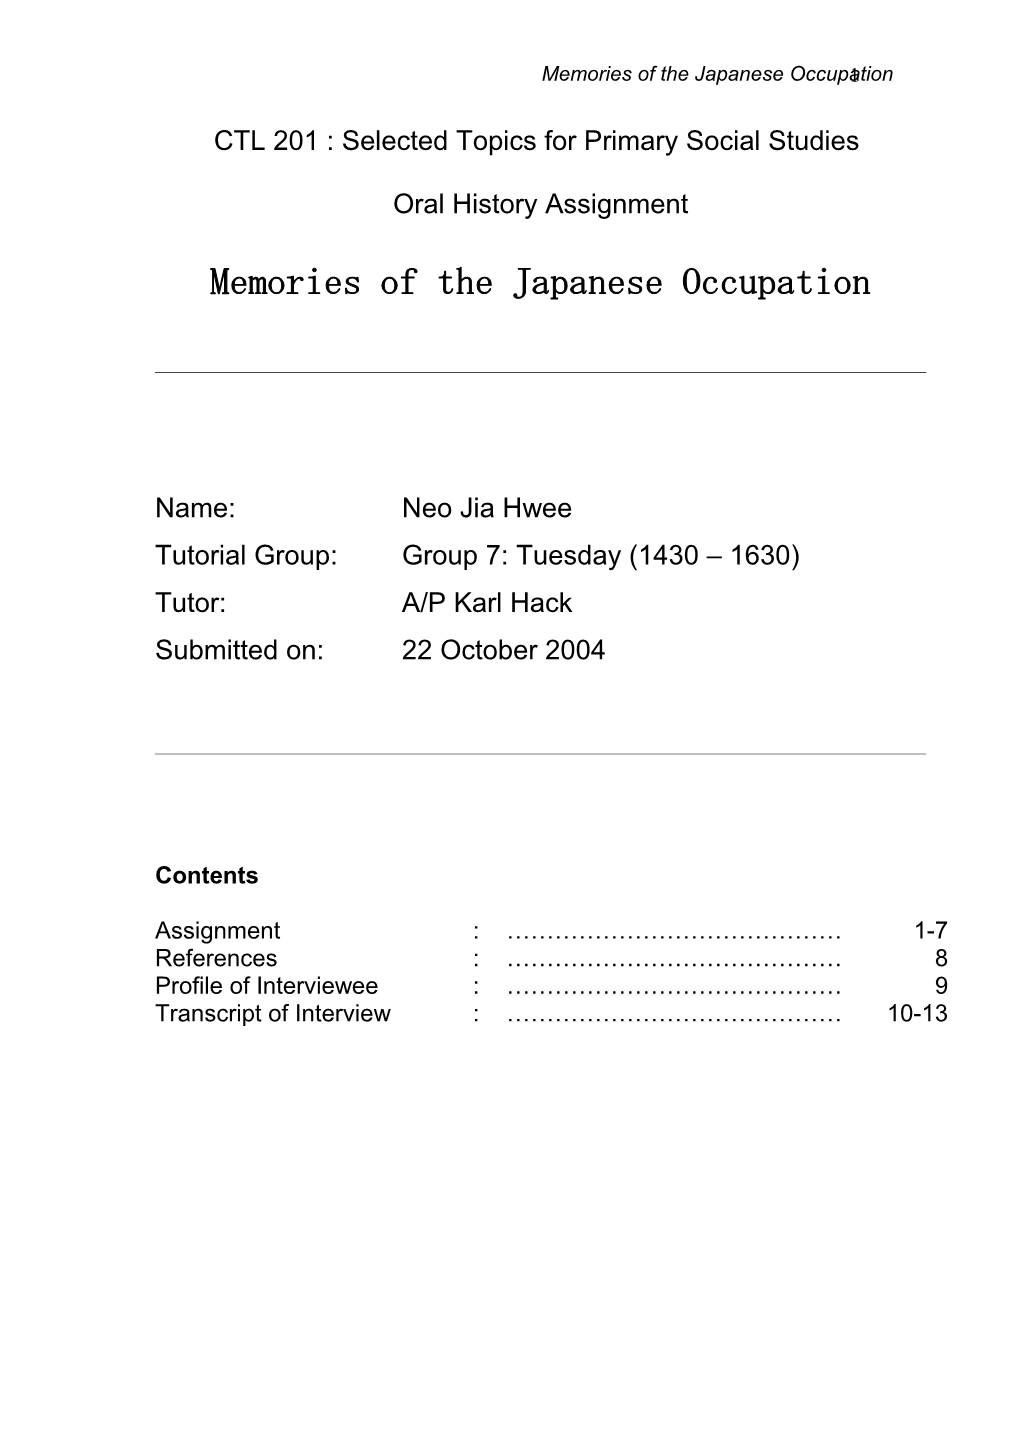 Surviving During the Japanese Occupation